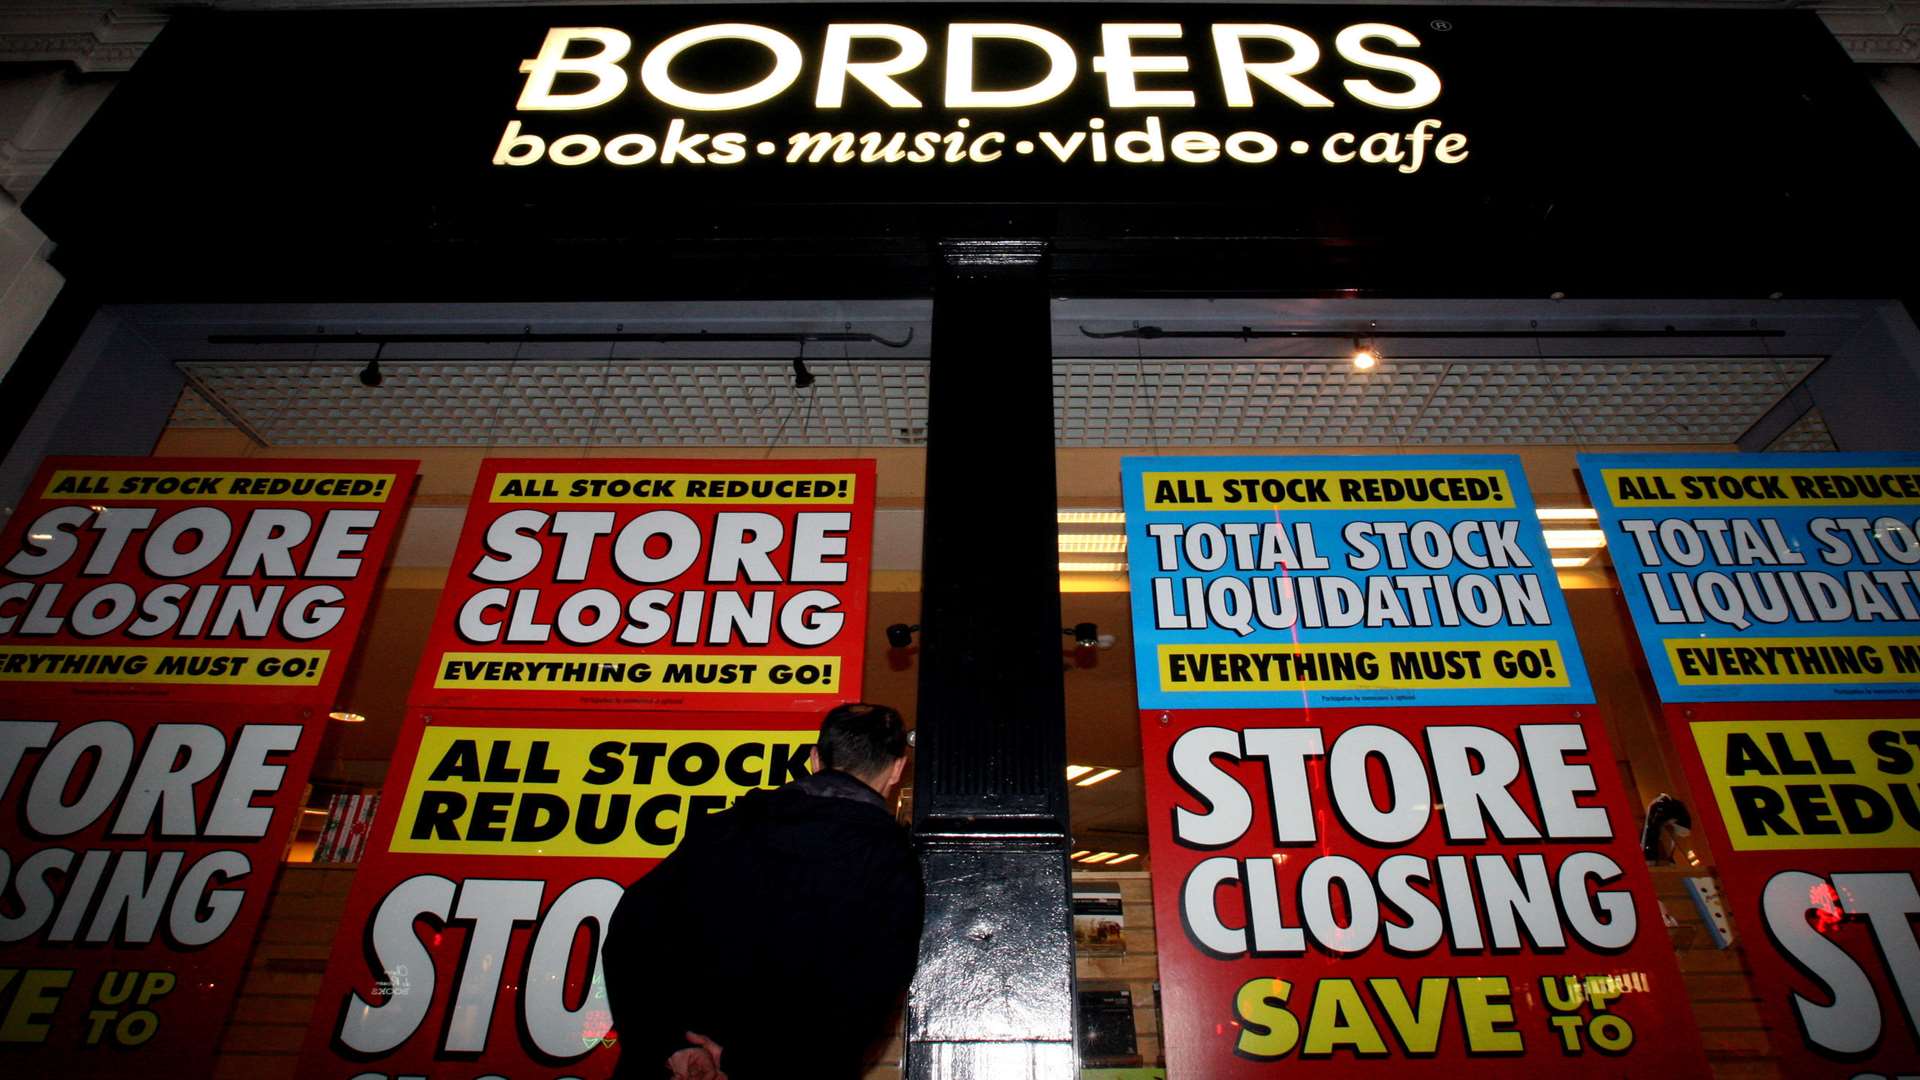 The Borders bookshop chain fell into administration just before Christmas in 2009